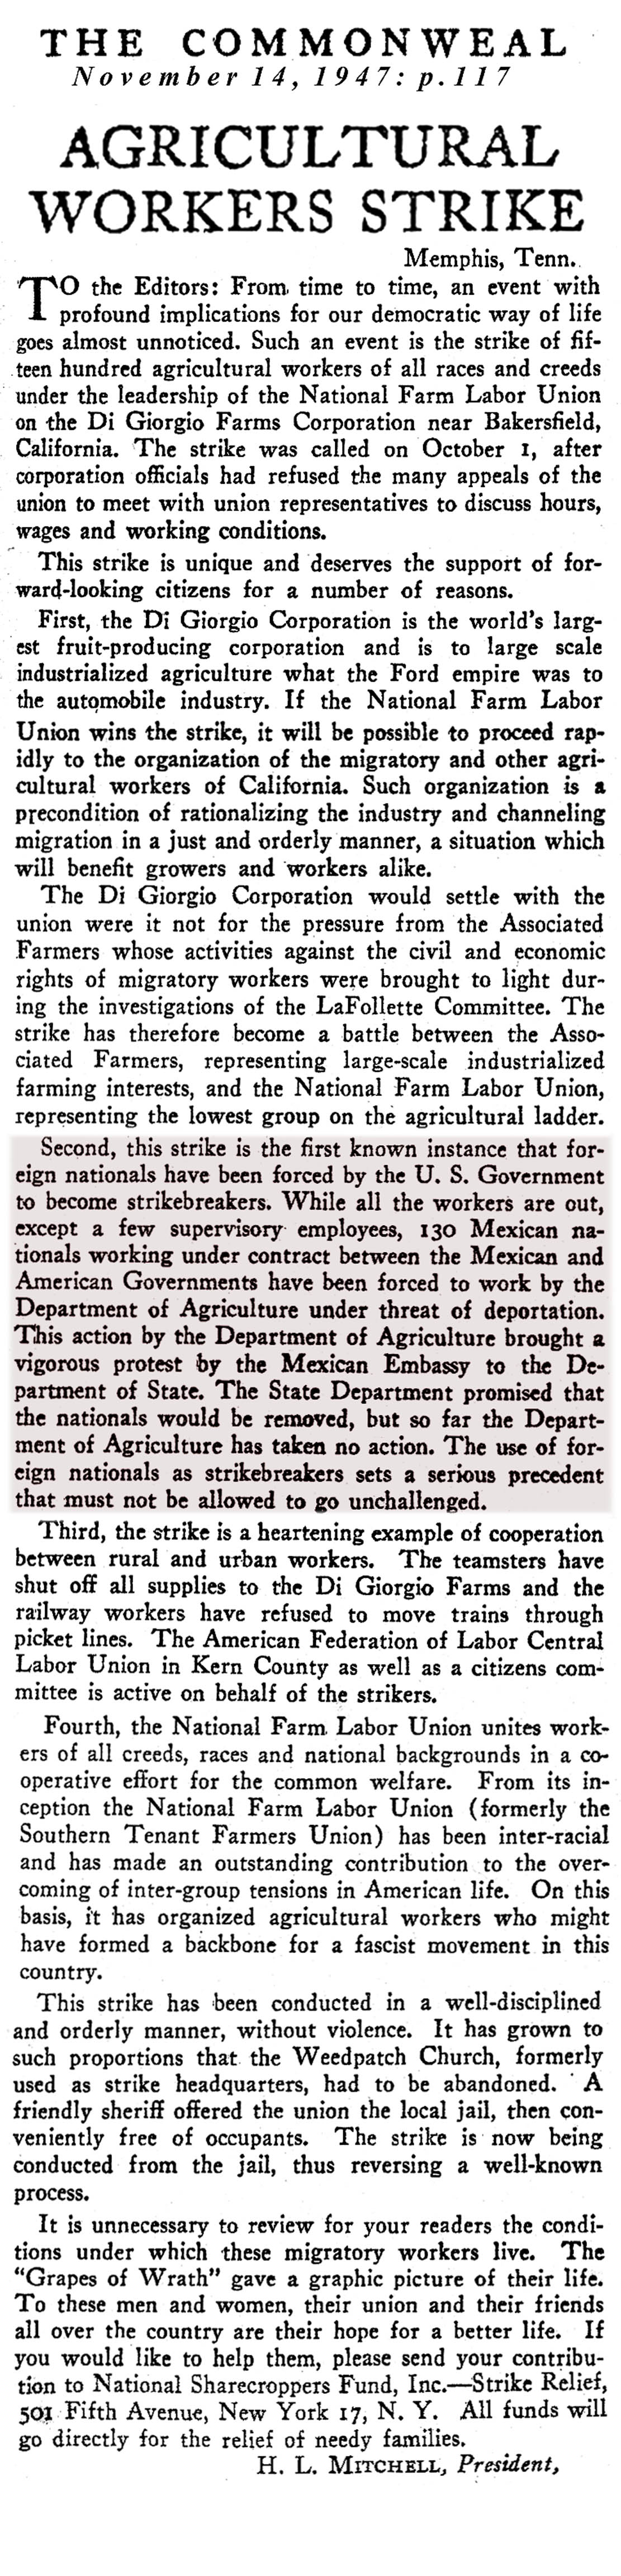 Government-Supplied Scabs (Commonweal Magazine, 1947)